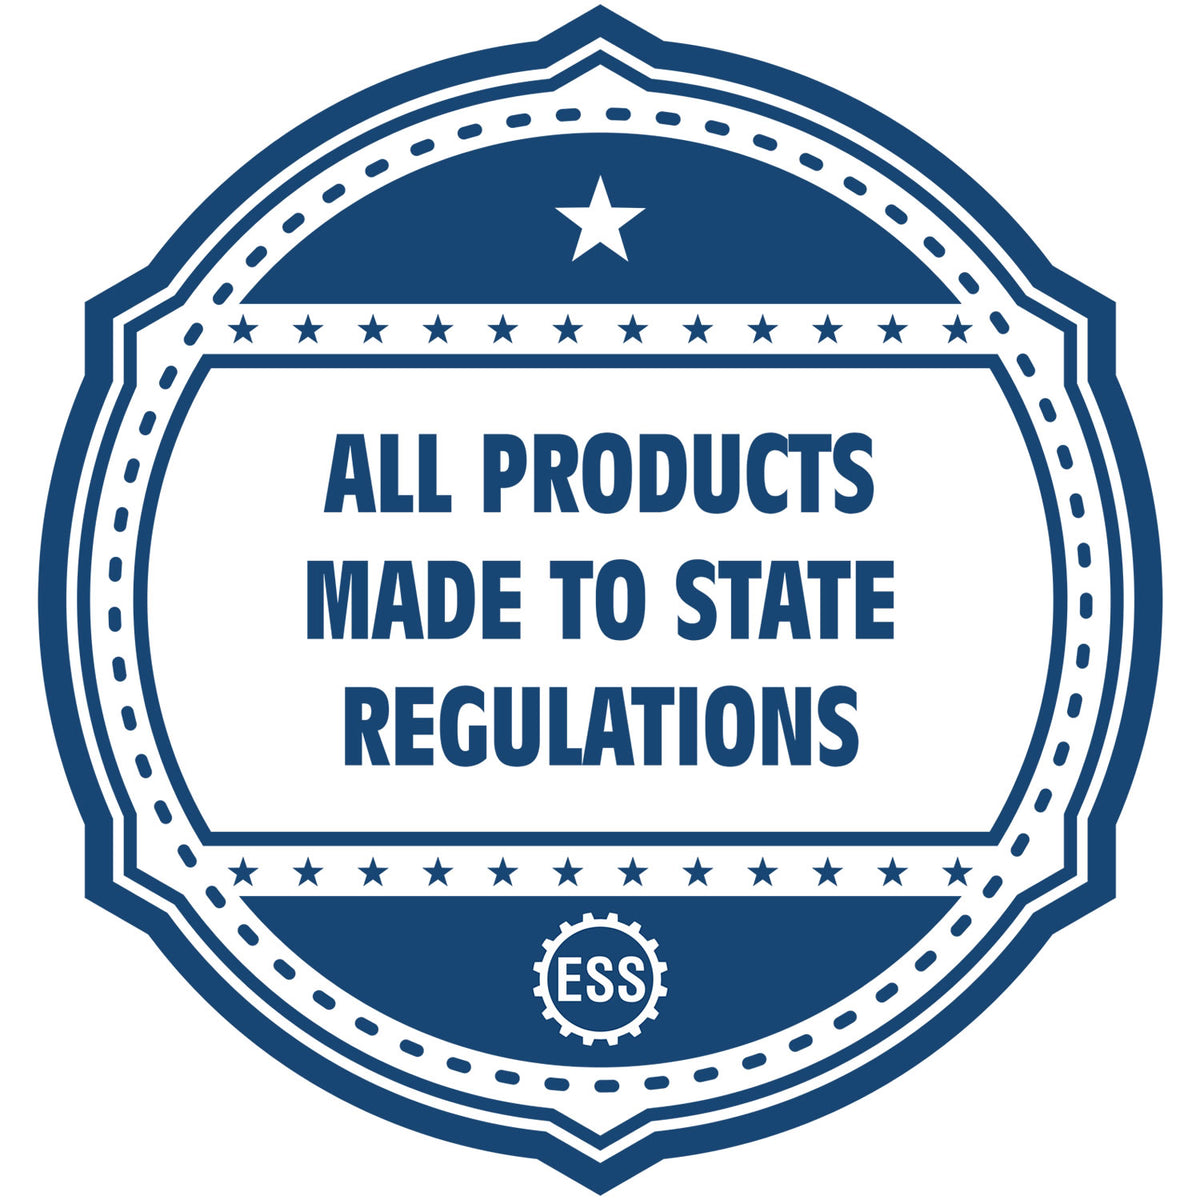 An icon or badge element for the State of Connecticut Architectural Seal Embosser showing that this product is made in compliance with state regulations.